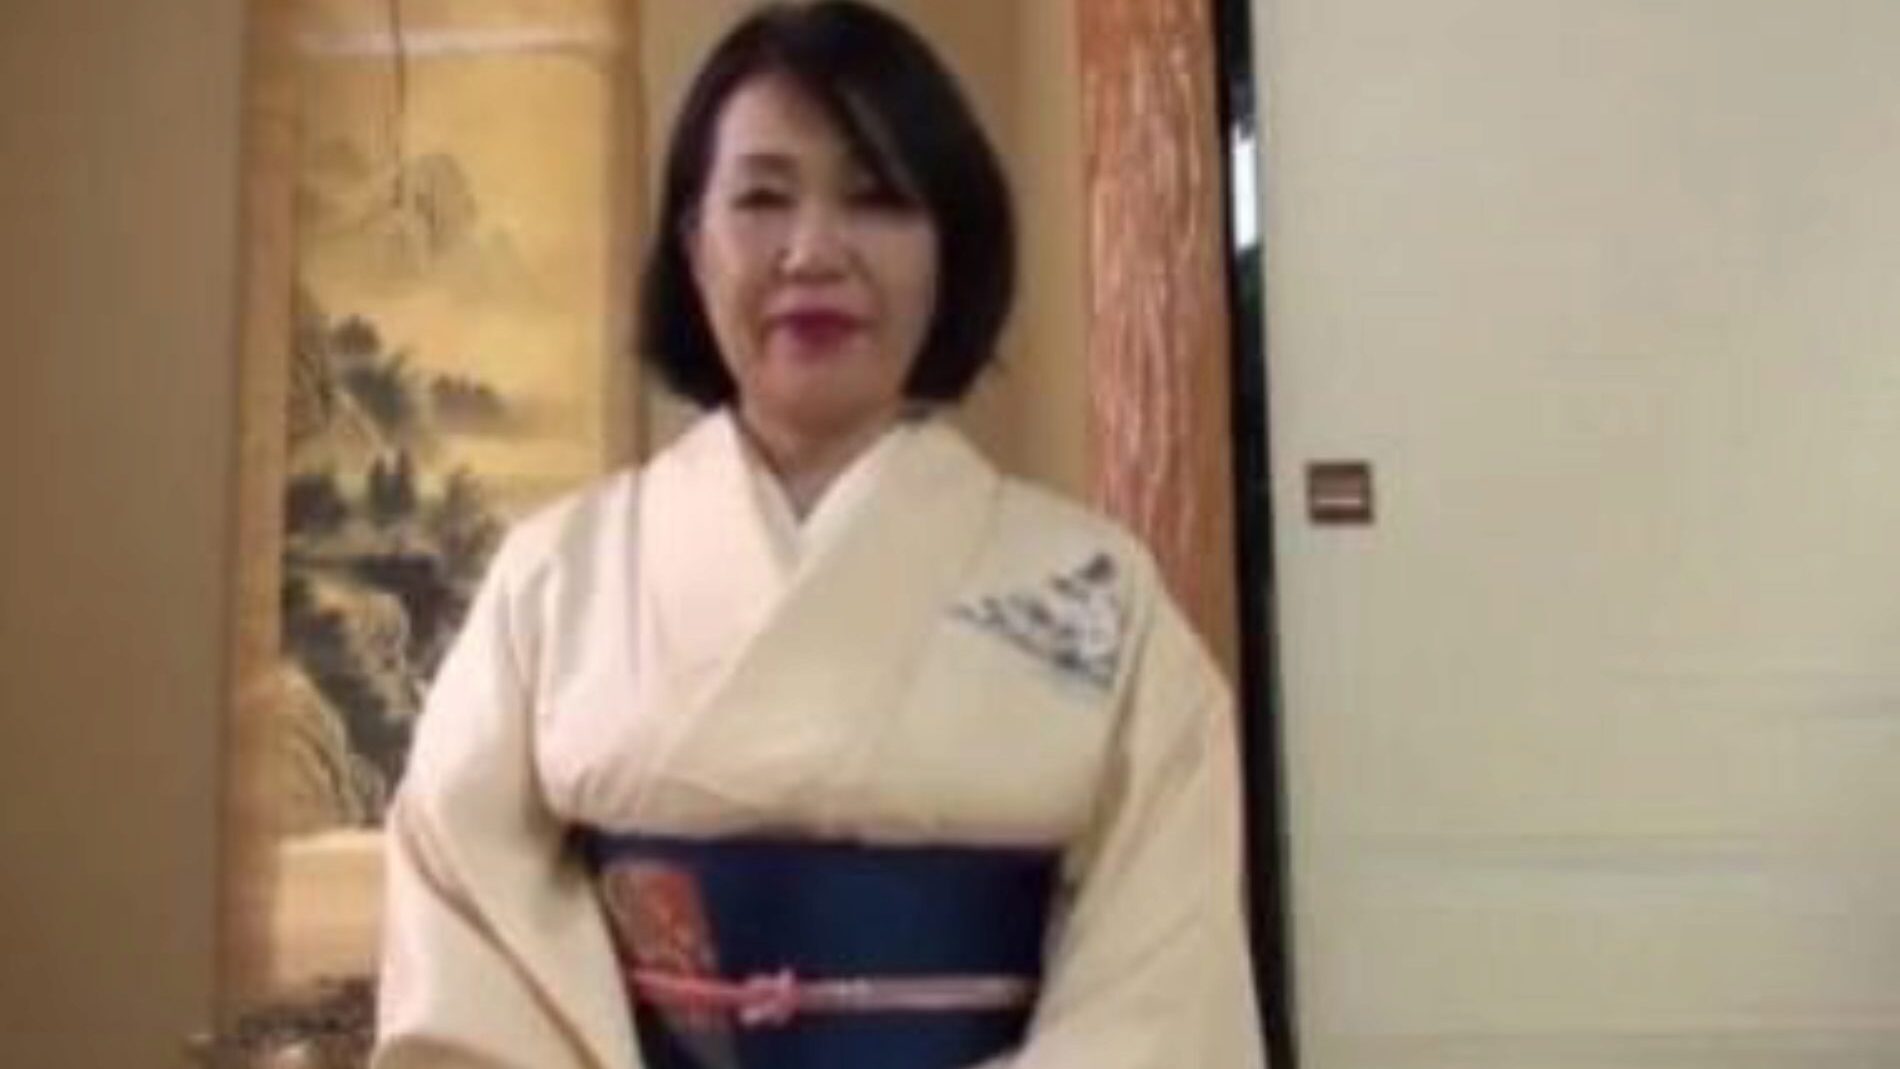 Japanese Grandmother 1, Free Xxx Japanese Tube Porn Movie 01 See Japanese Grandmother 1 clip episode on xHamster, the finest lovemaking tube web resource with tons of free-for-all Xxx Japanese Tube & Spankwire Mobile porno videos